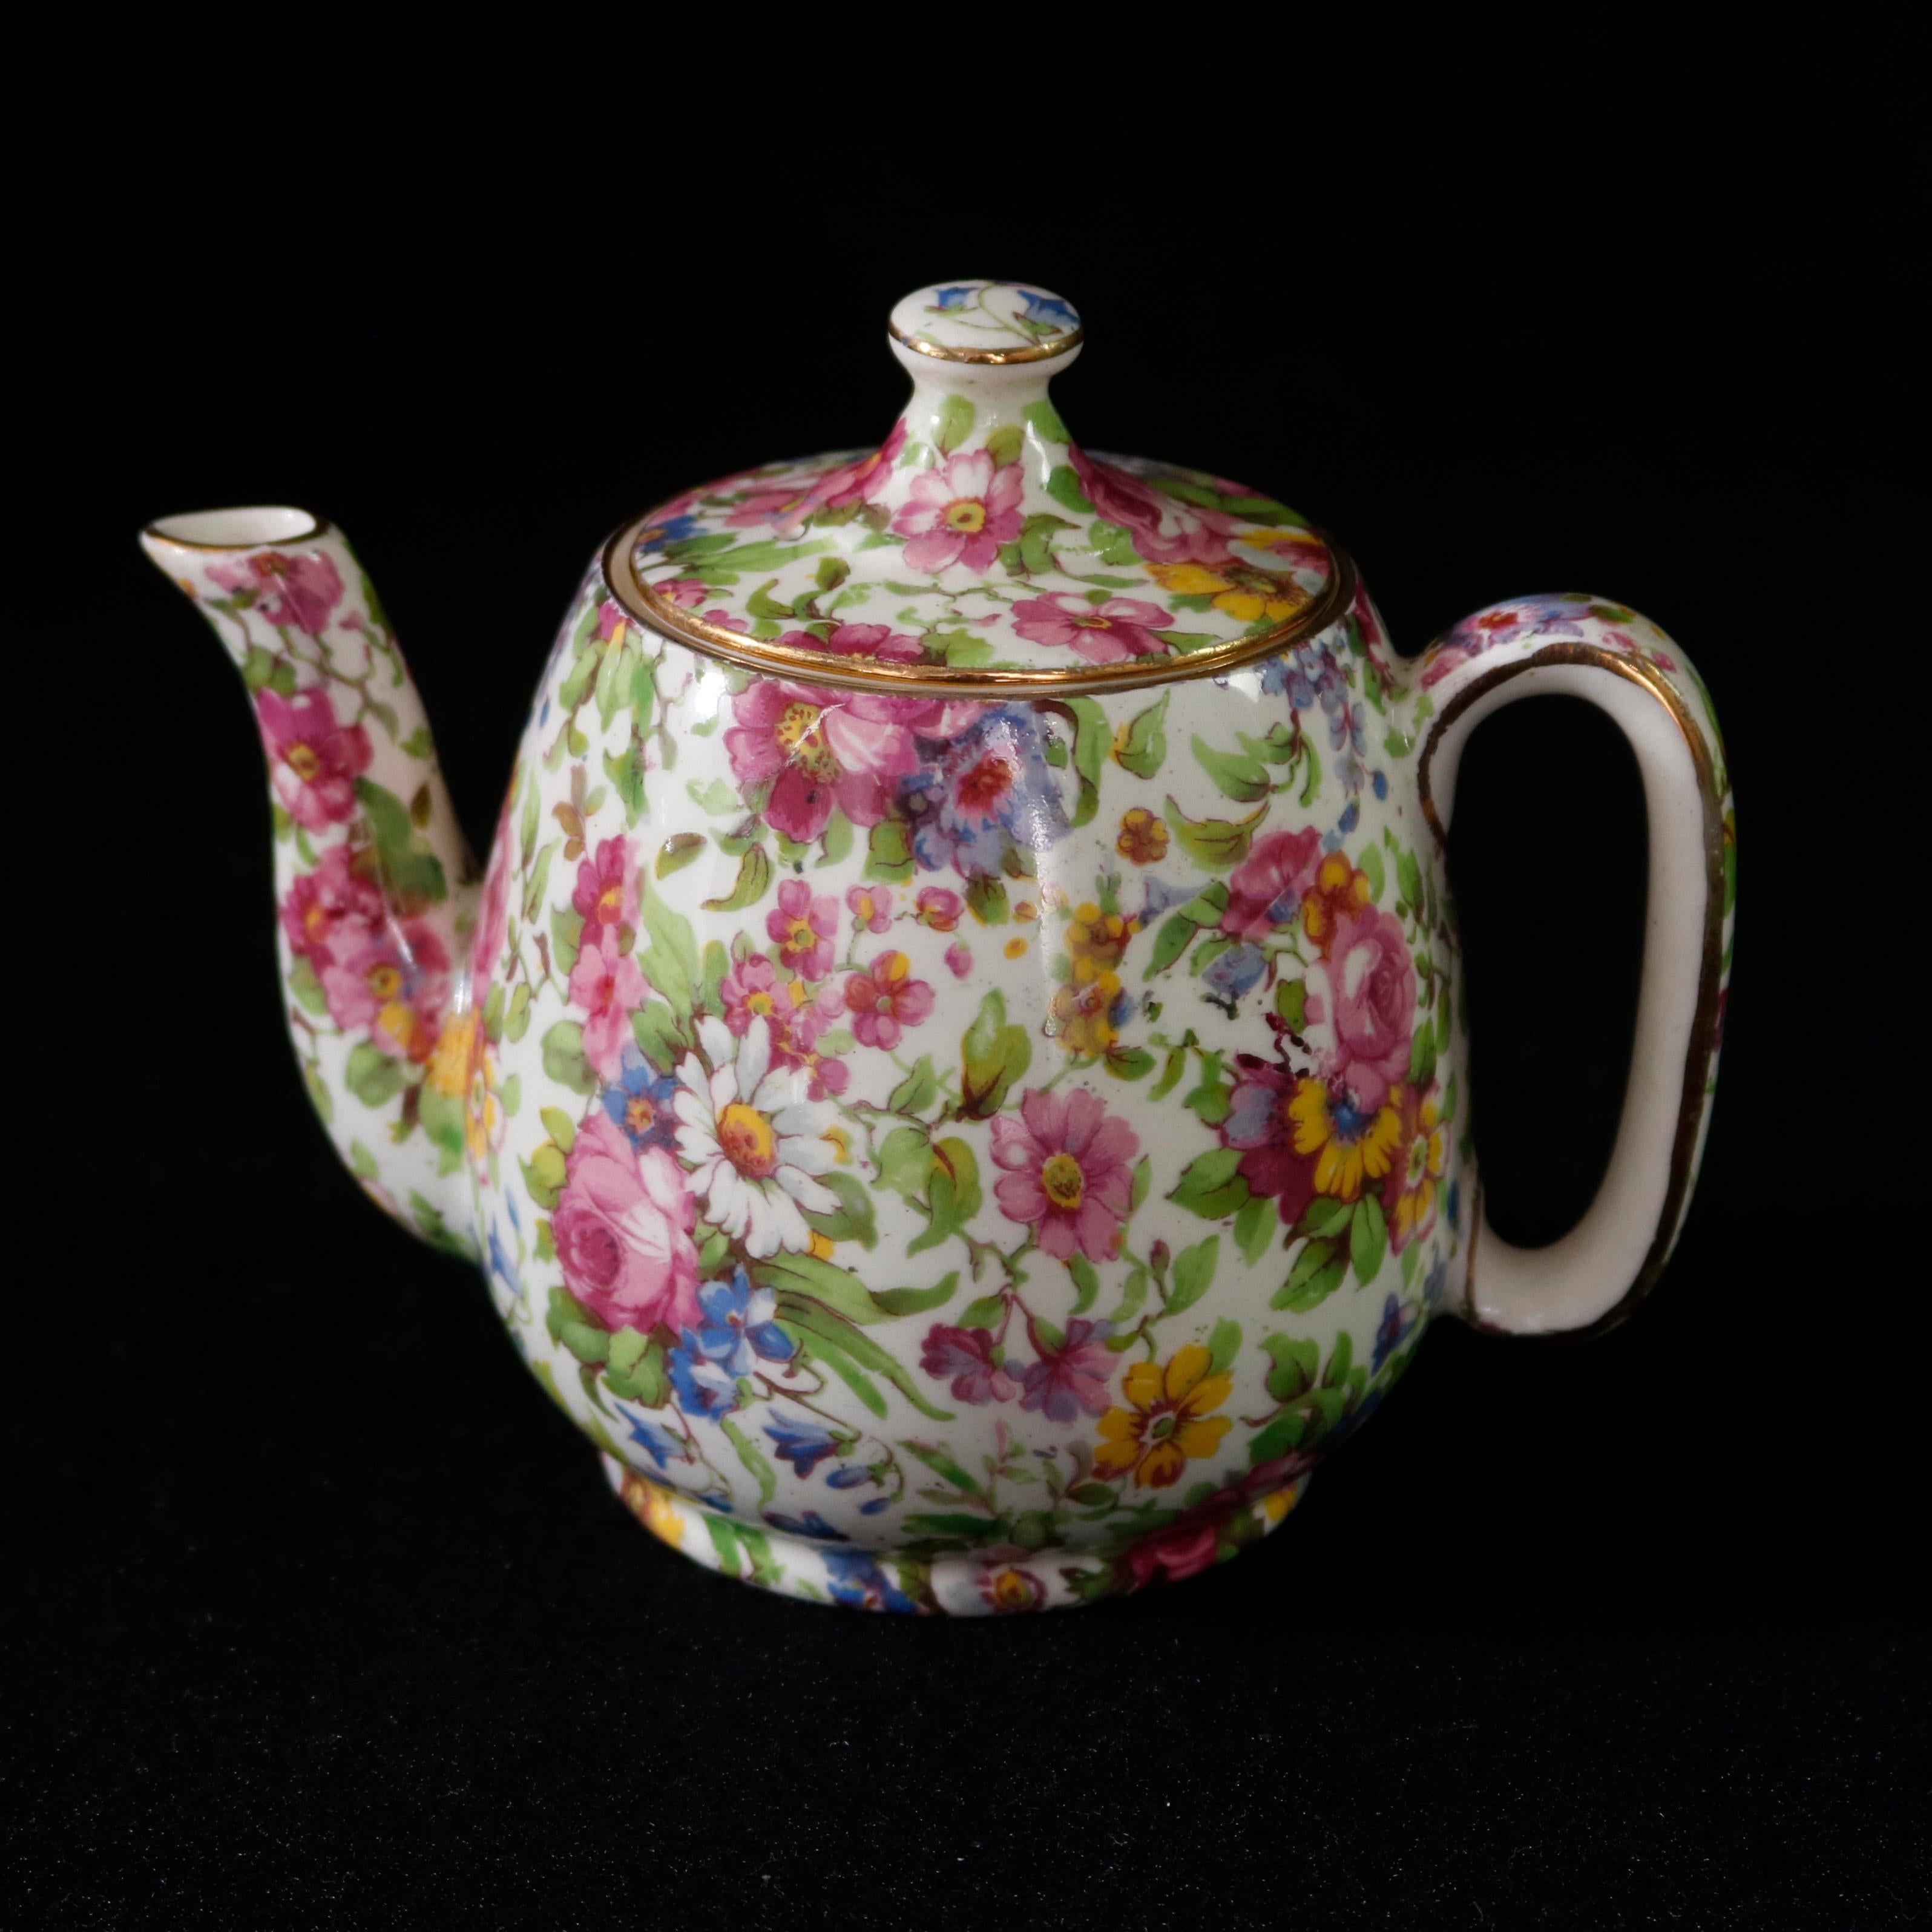 An antique English porcelain tea set by Royal Winton Grimwaders in Summertime pattern offers all-over floral chintz pattern, circa 1920

Measures - teapot: 6